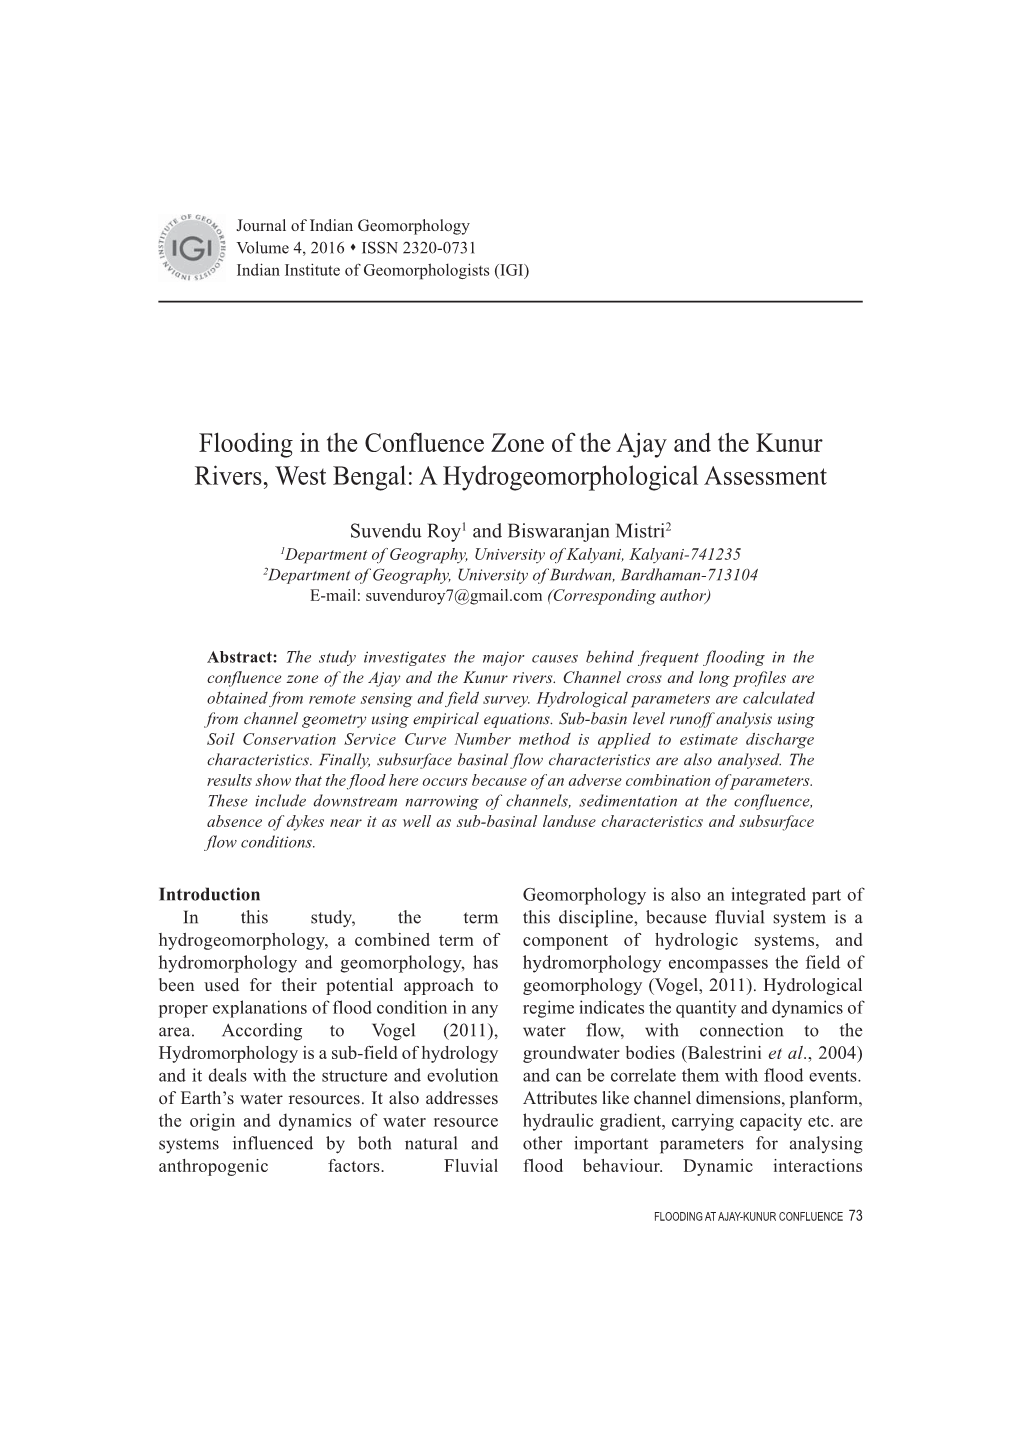 Flooding in the Confluence Zone of the Ajay and the Kunur Rivers, West Bengal: a Hydrogeomorphological Assessment